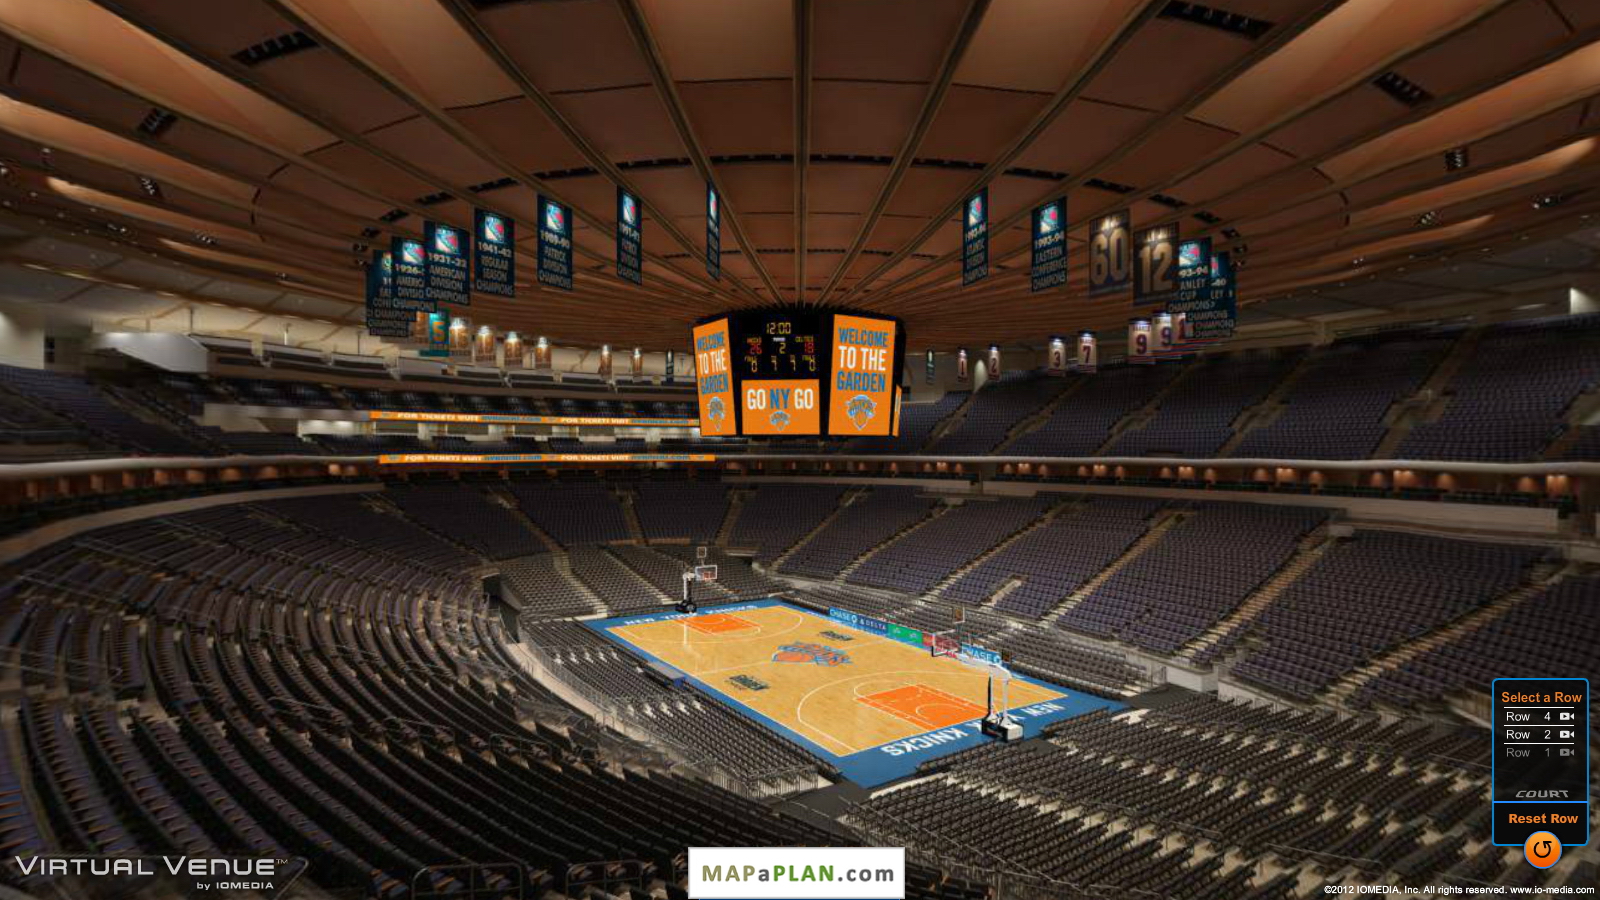 Madison square garden seating chart View from section 201